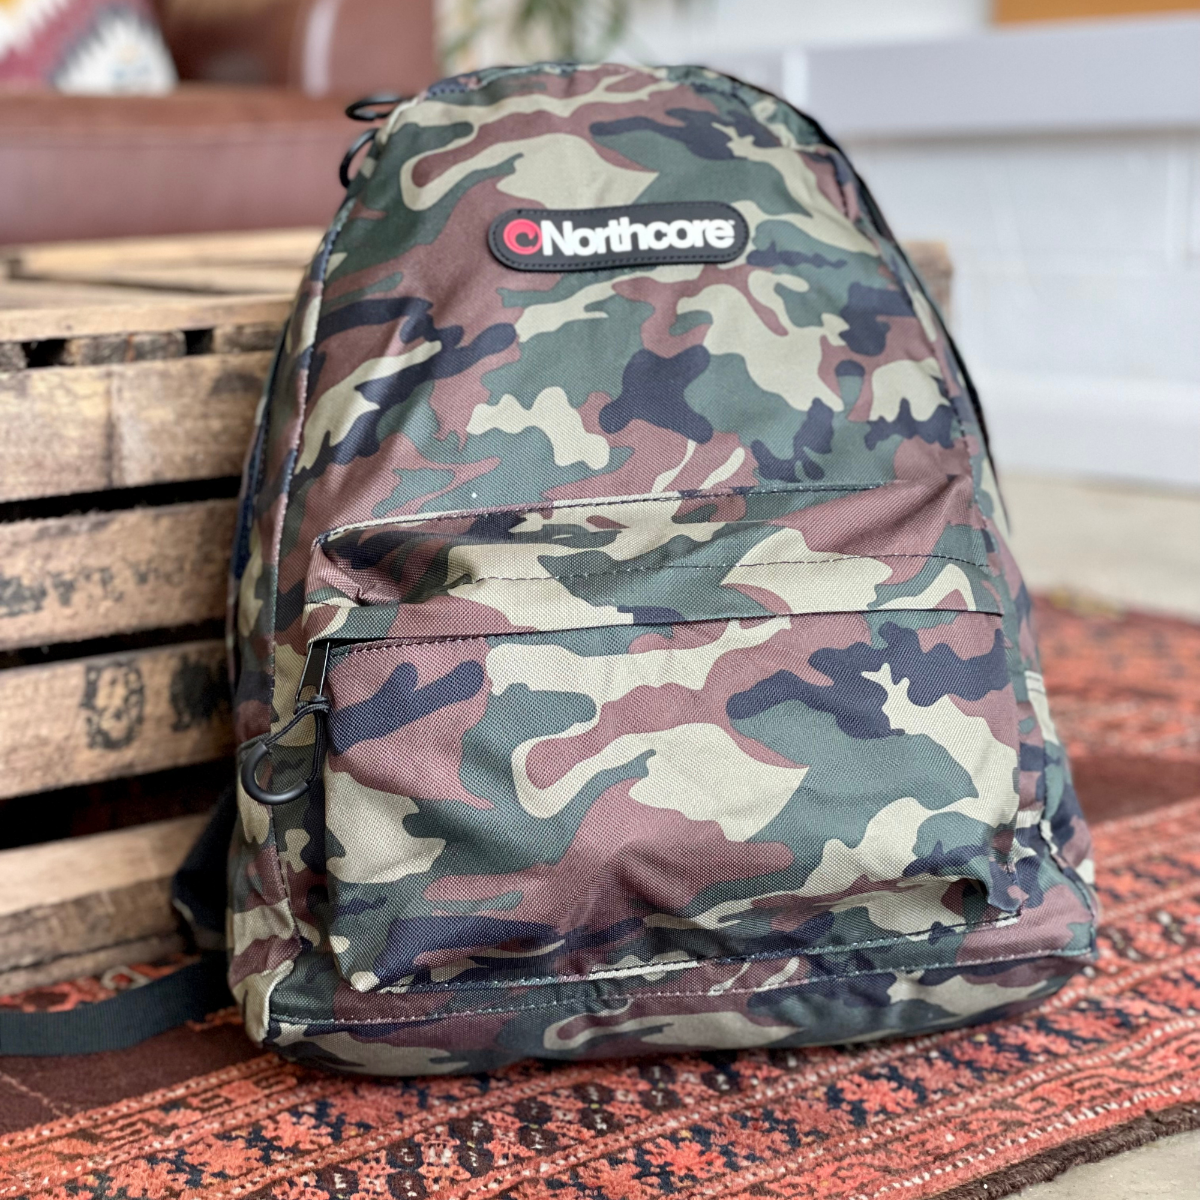 Northcore Essentials Backpack- Camo